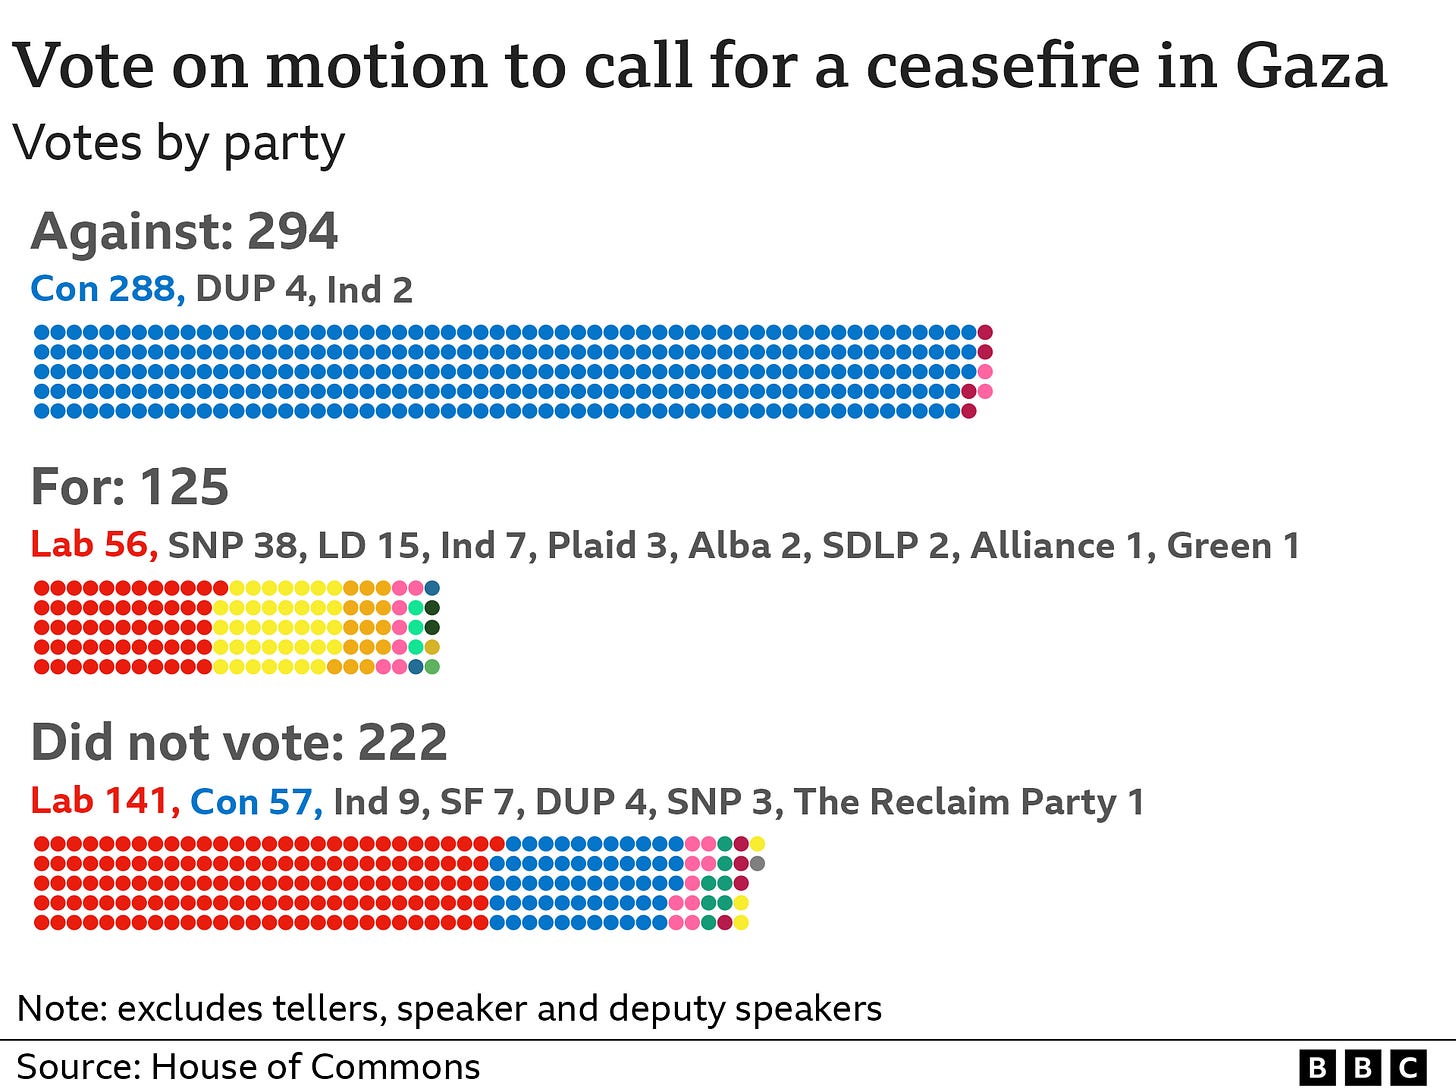 How did my MP vote on Gaza ceasefire? - BBC News